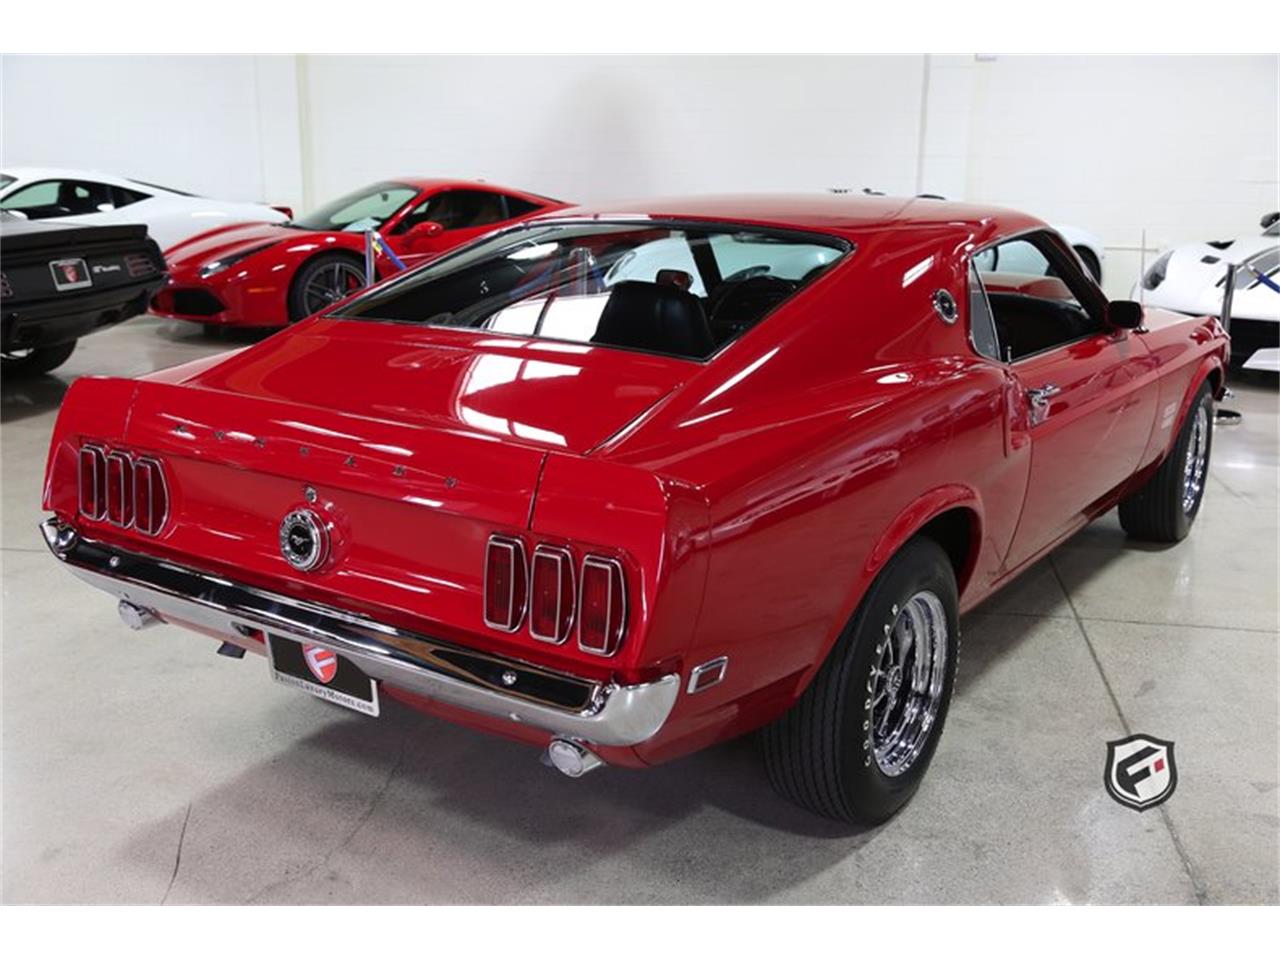 1969 Ford Mustang 429 Boss for Sale | ClassicCars.com | CC ...